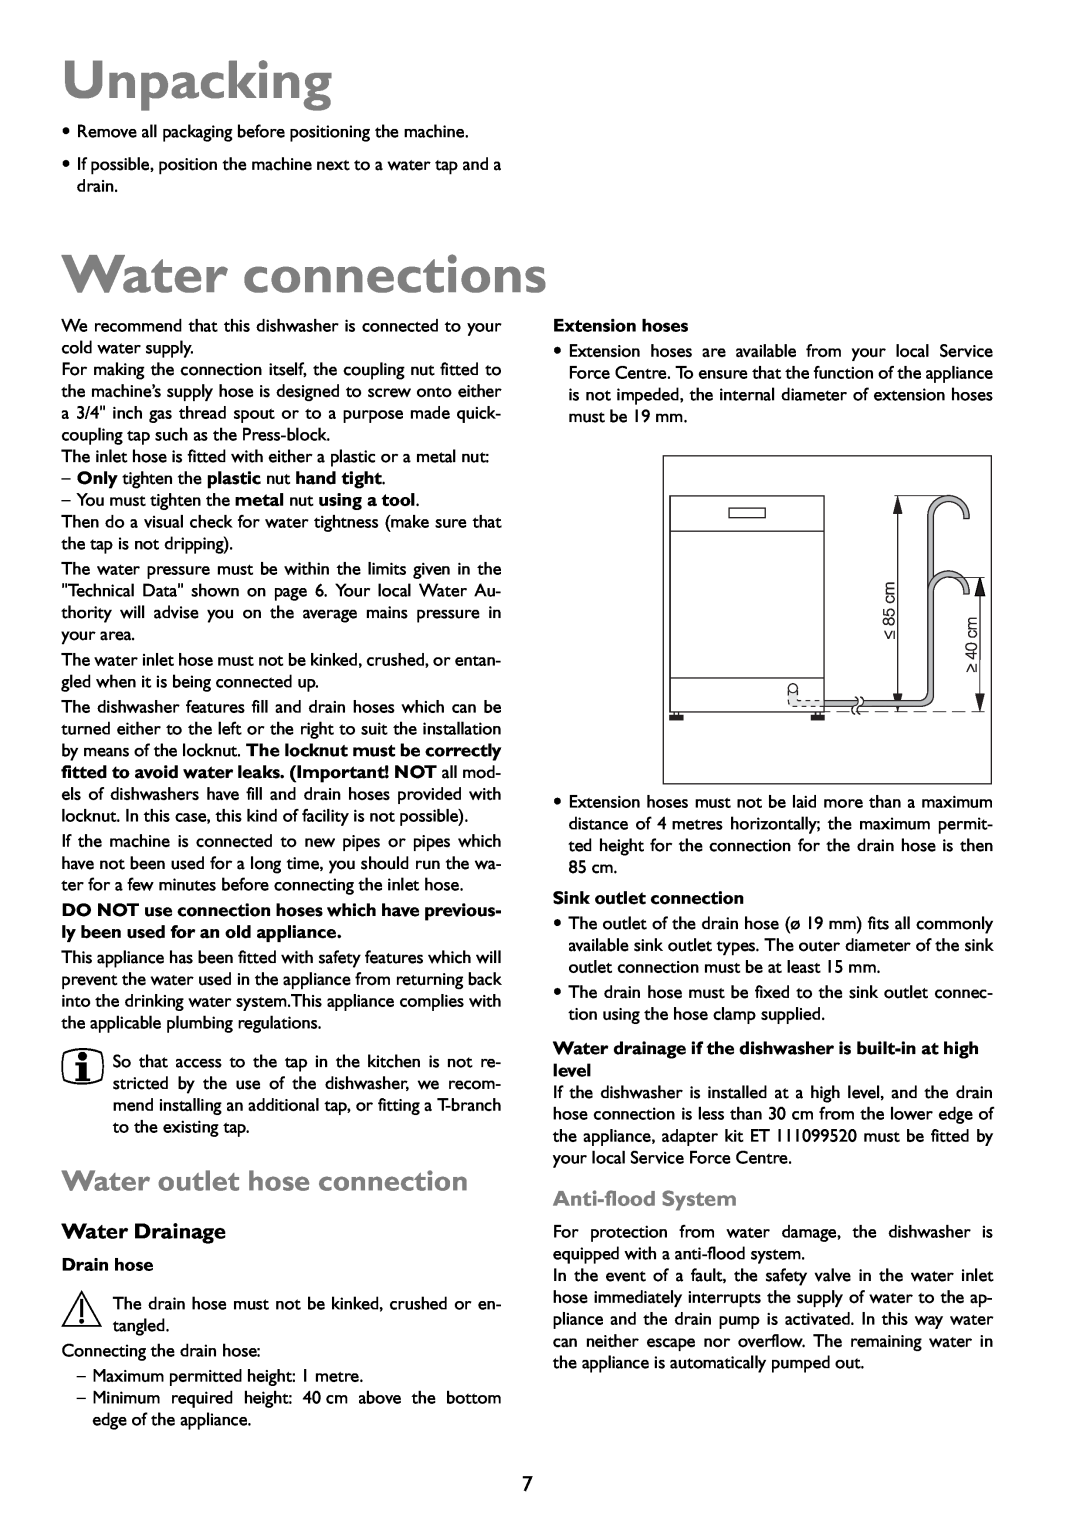 John Lewis JLDWW 1203 instruction manual Unpacking, Water connections, Water outlet hose connection, Water Drainage 